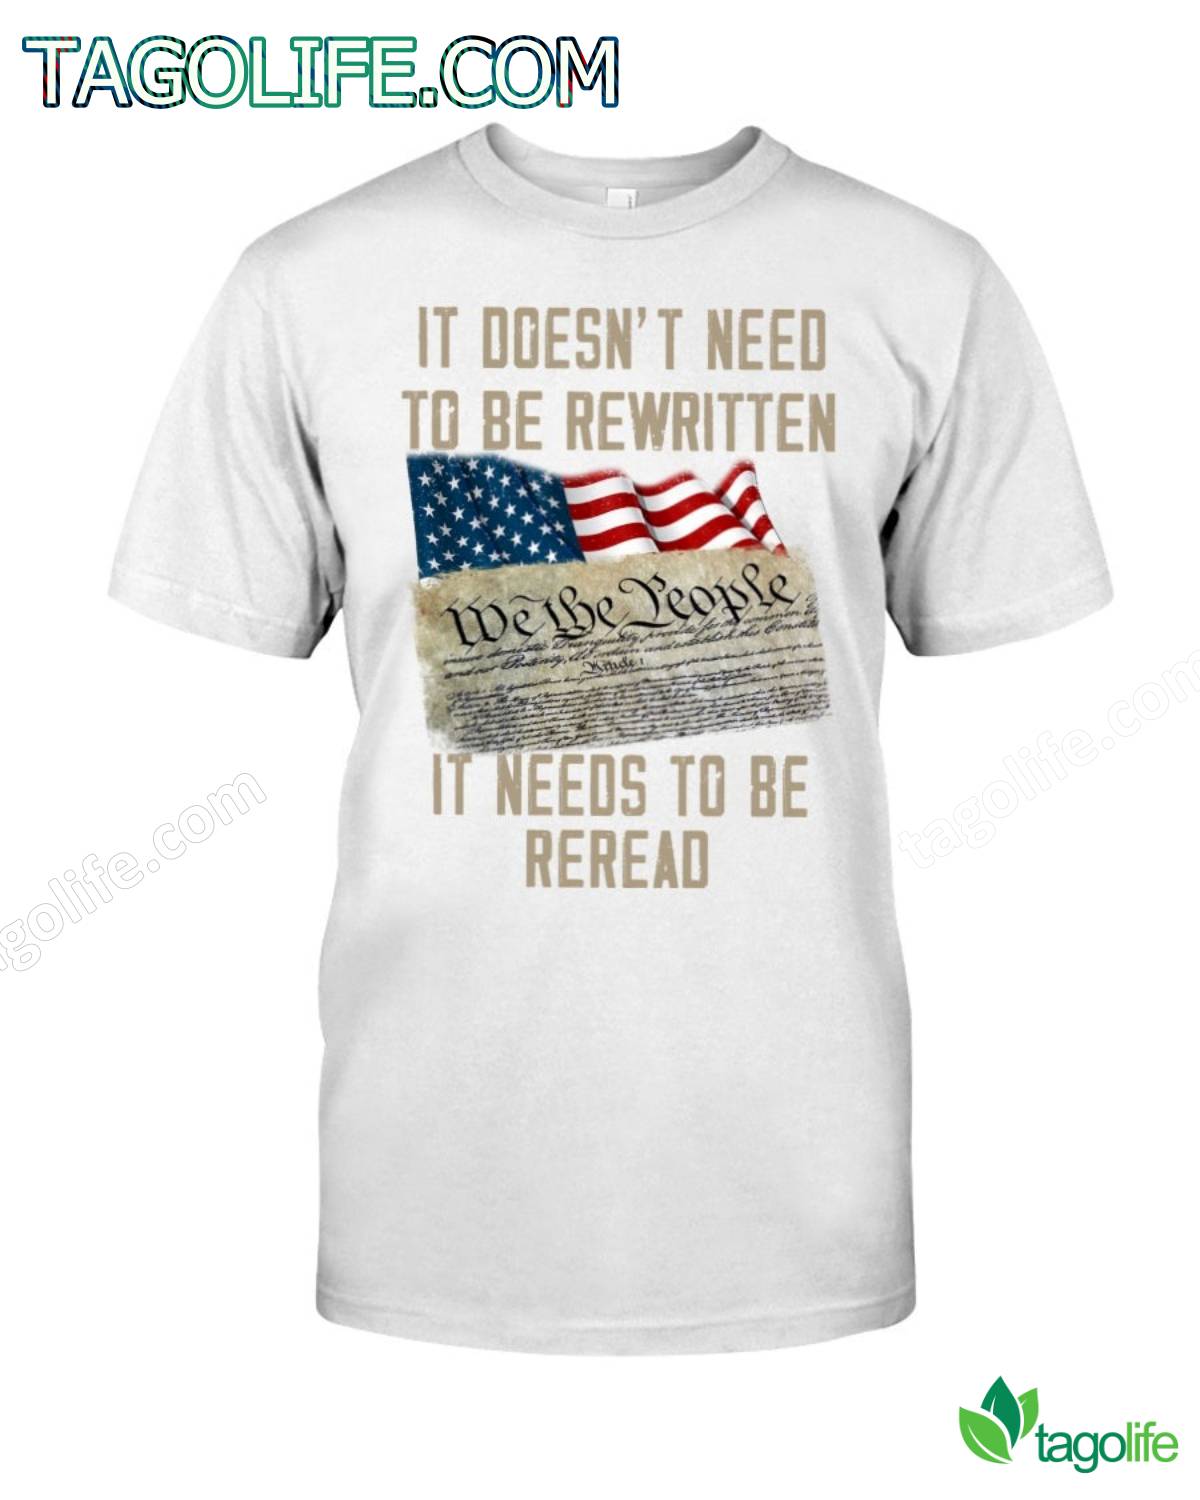 We Doesn't Need To Be Rewritten T-shirt